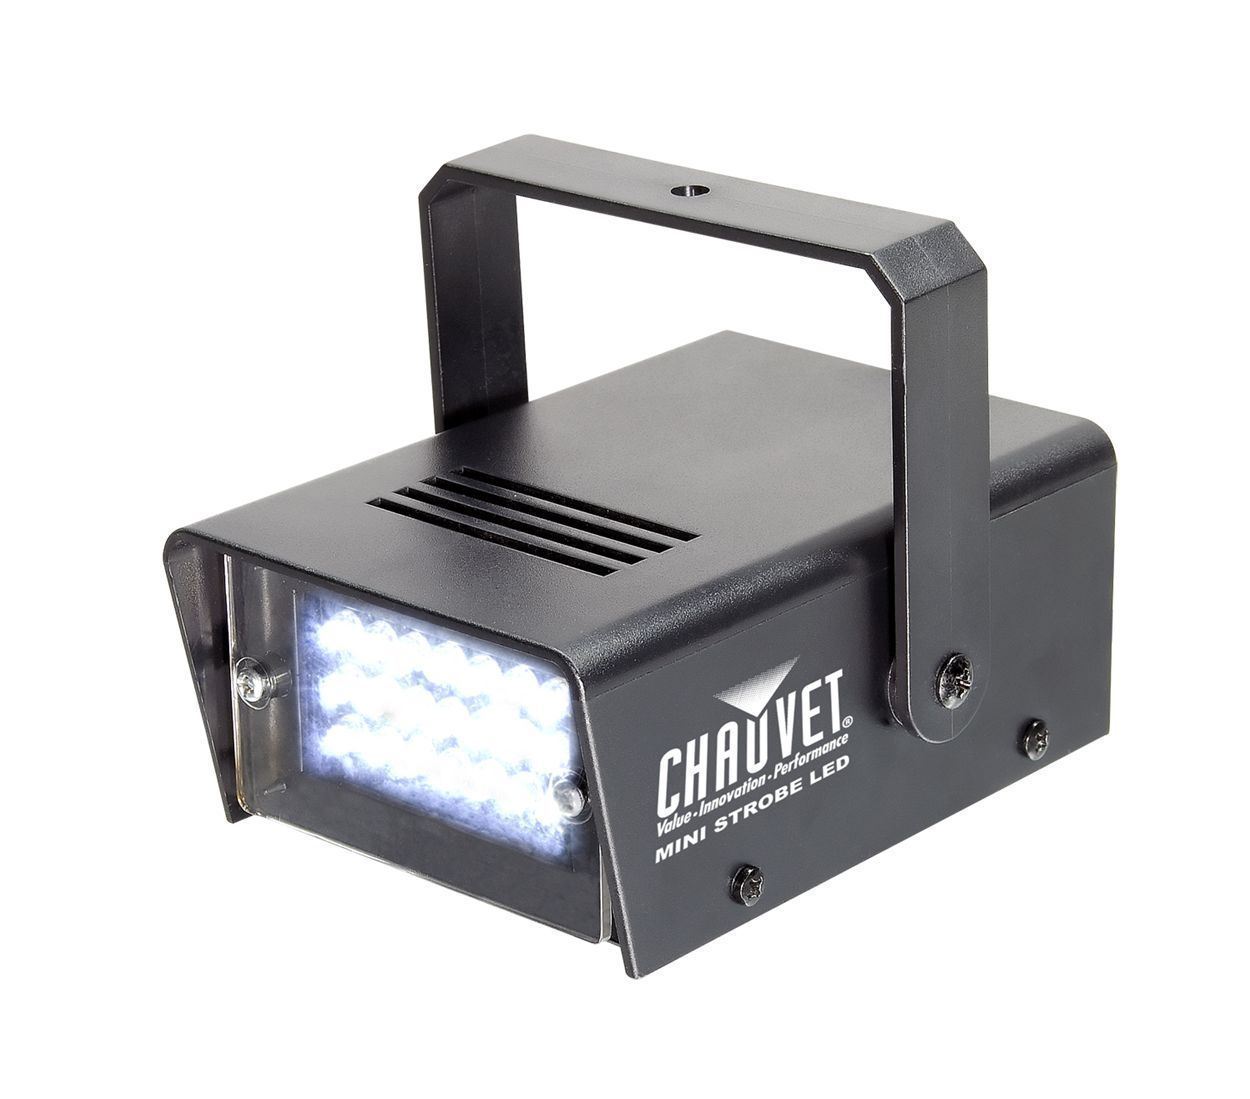 Chauvet DJ MINI Strobe LED FX Light with Variable Speed (replaces CH